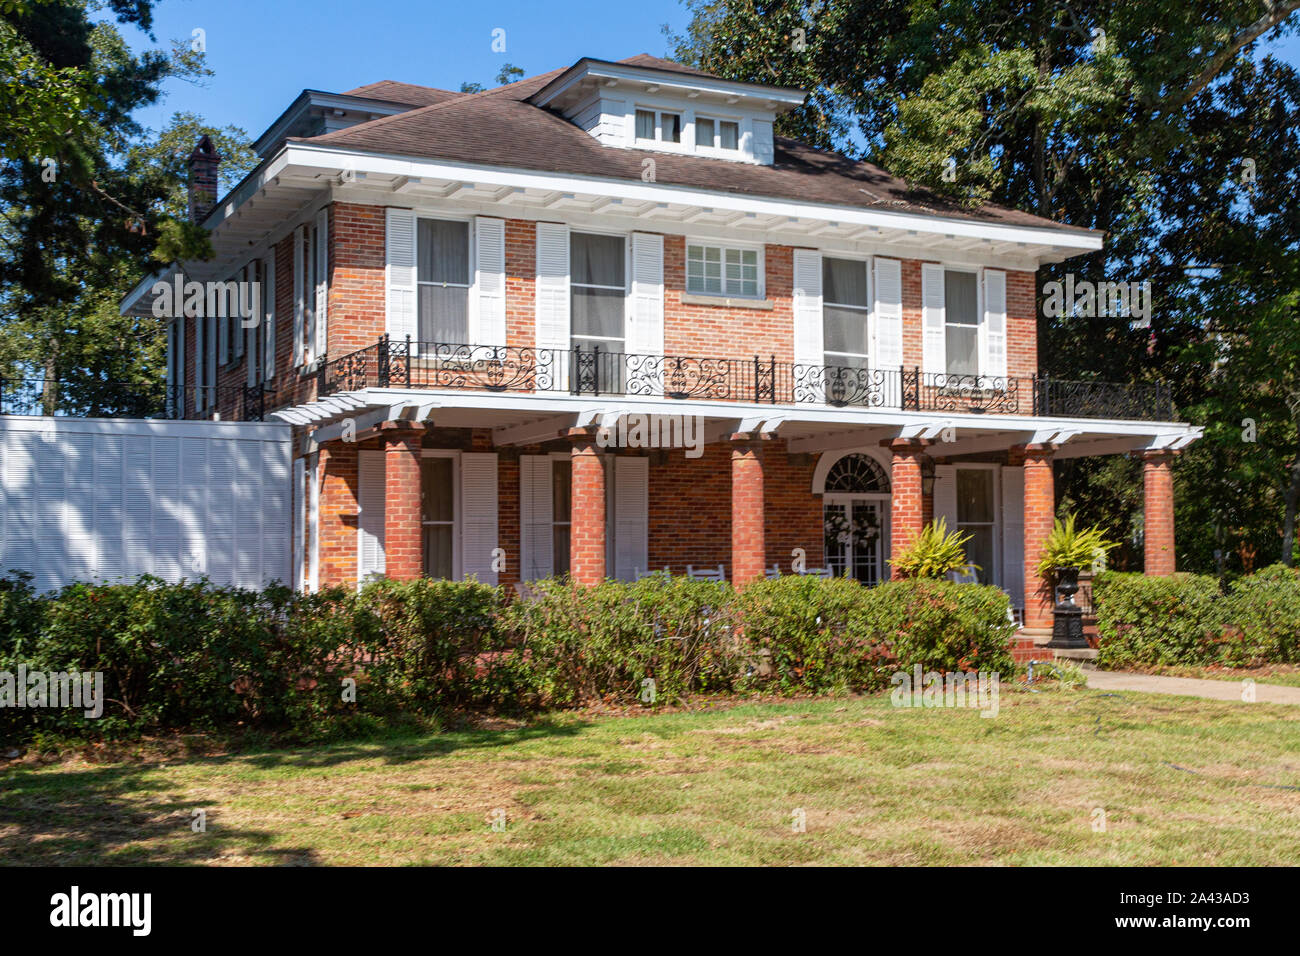 The fictional home of the Eatentons in the movie Steel Magnolias filmed in Natchitoches, Louisiana. Stock Photo